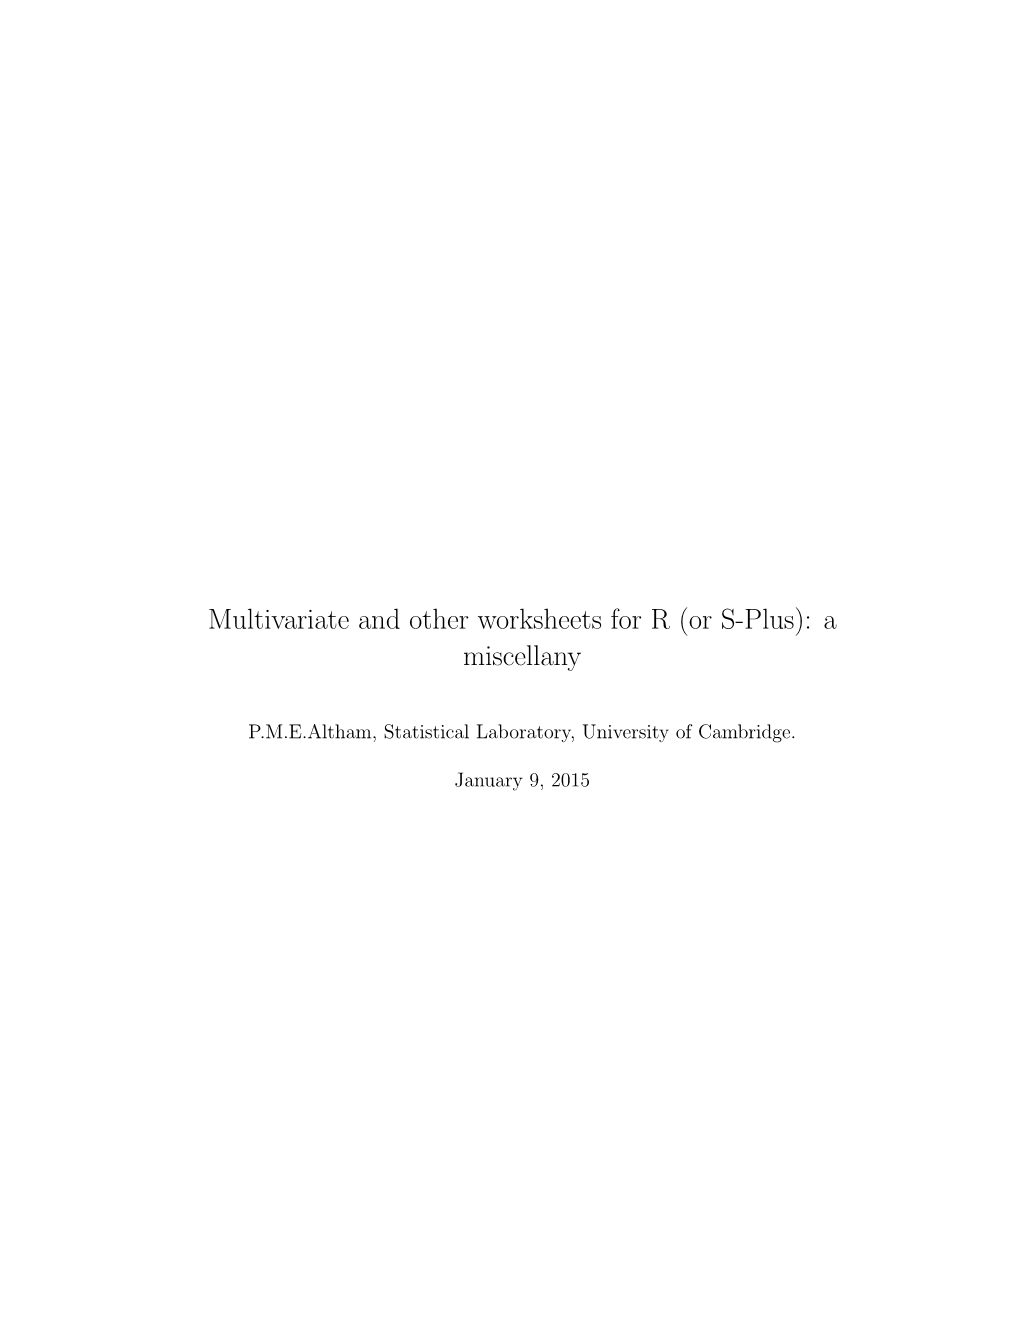 Multivariate and Other Worksheets for R (Or S-Plus): a Miscellany